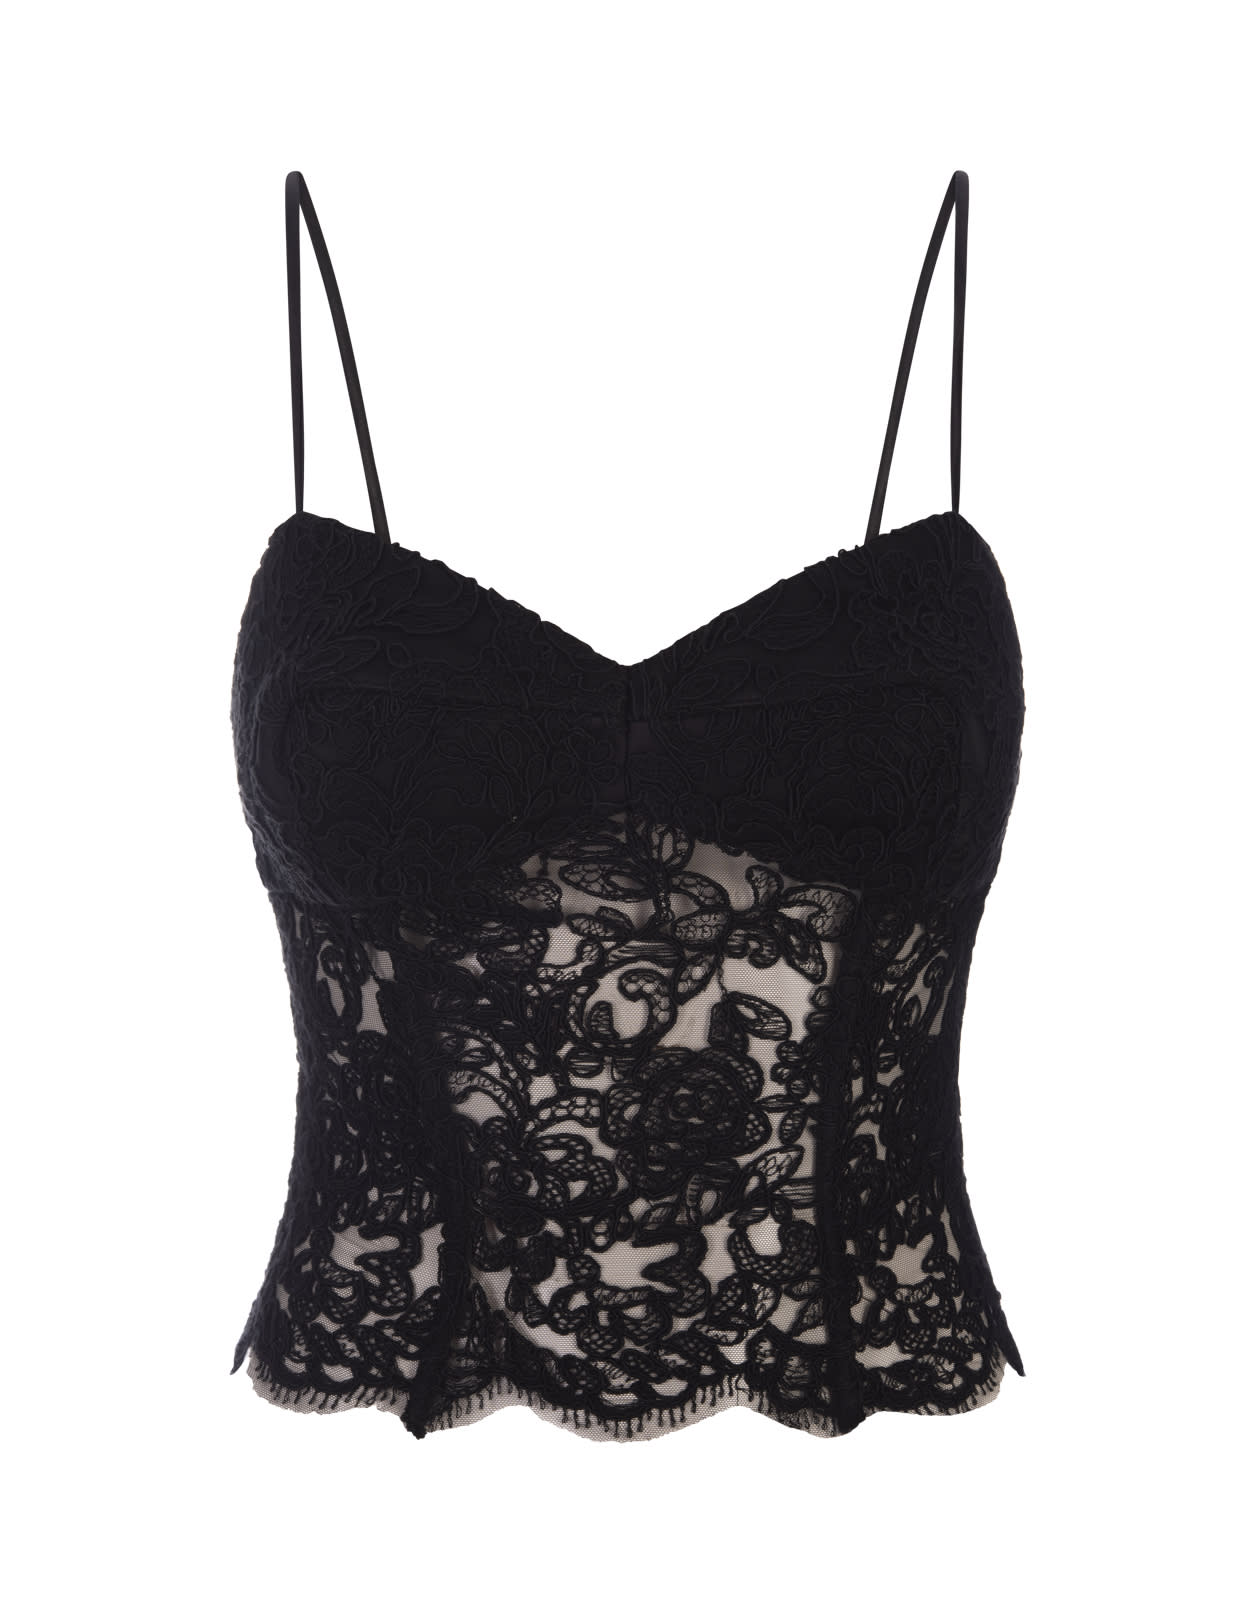 Black Bustier Top With Lace